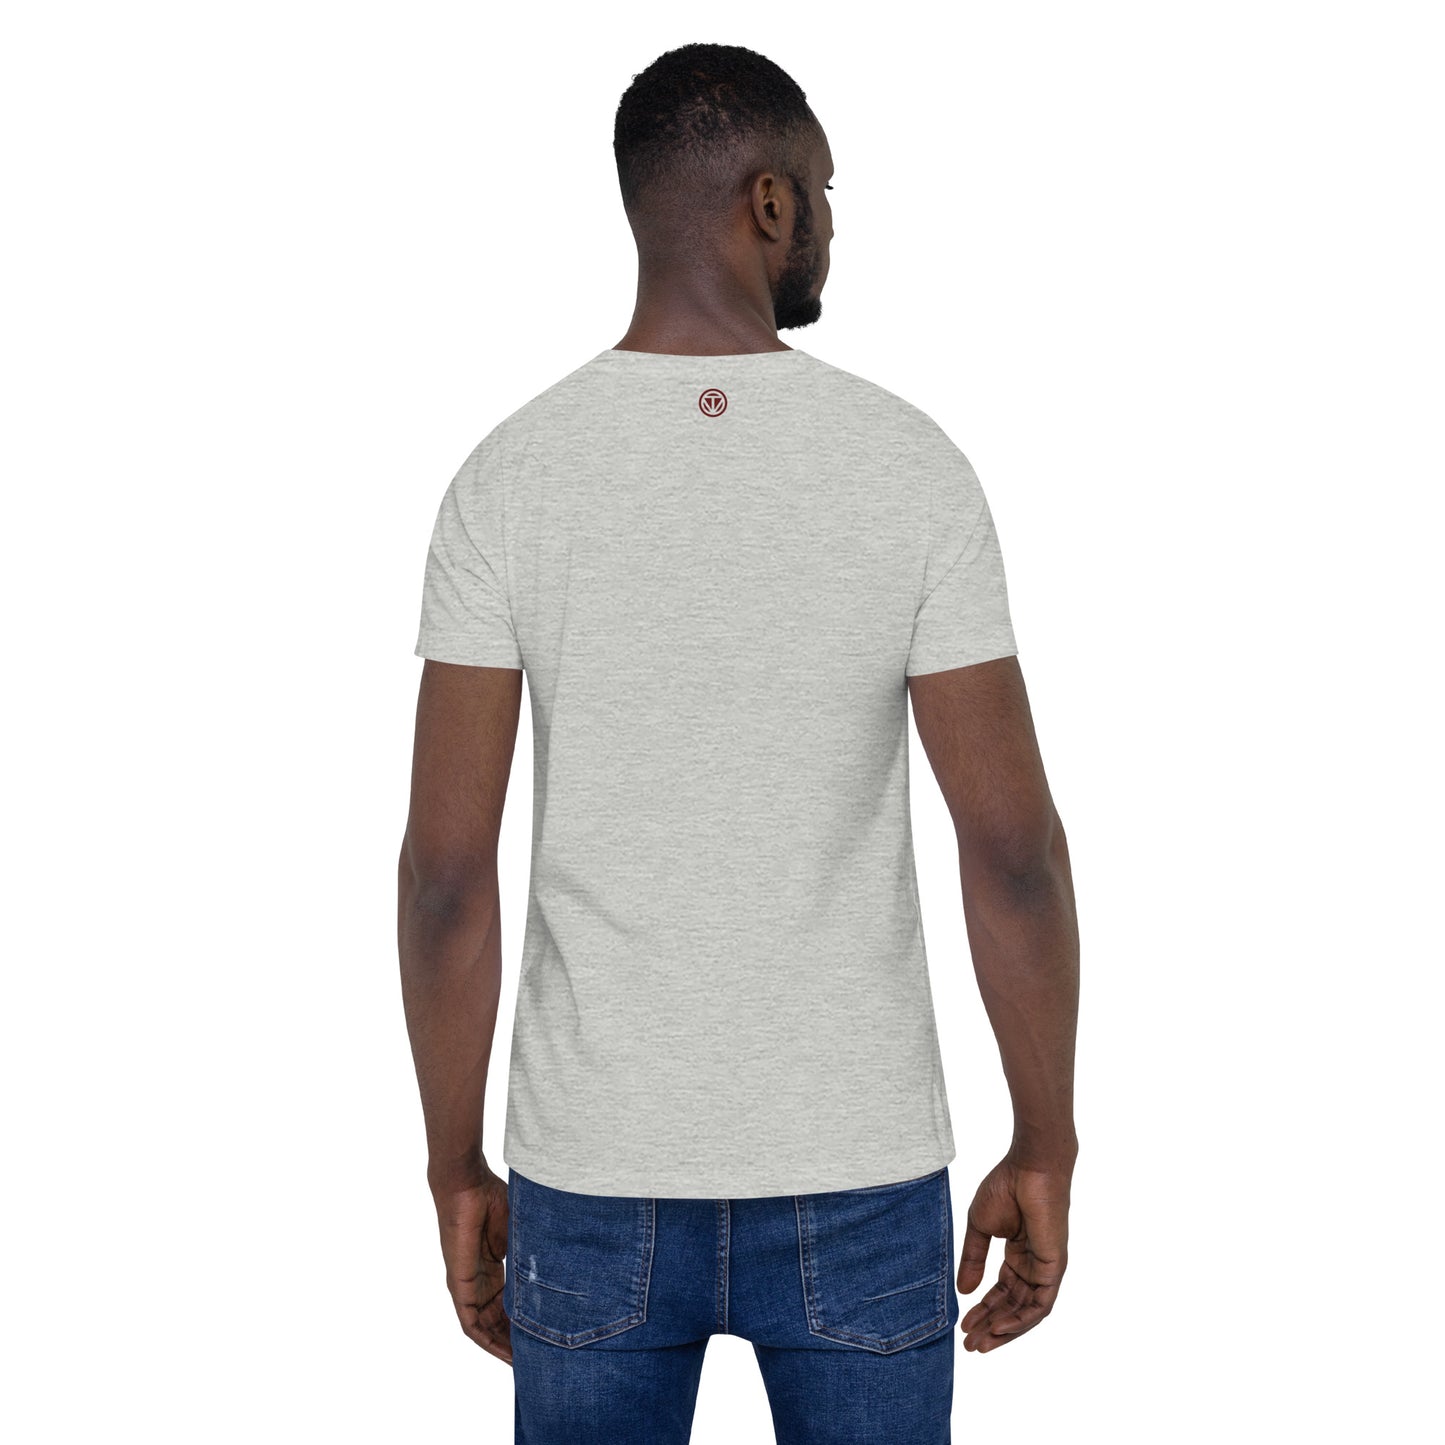 TIME OF VIBES - Men`s Cotton T-Shirt DRESS4RIDE (Athletic Heather) - €29.00